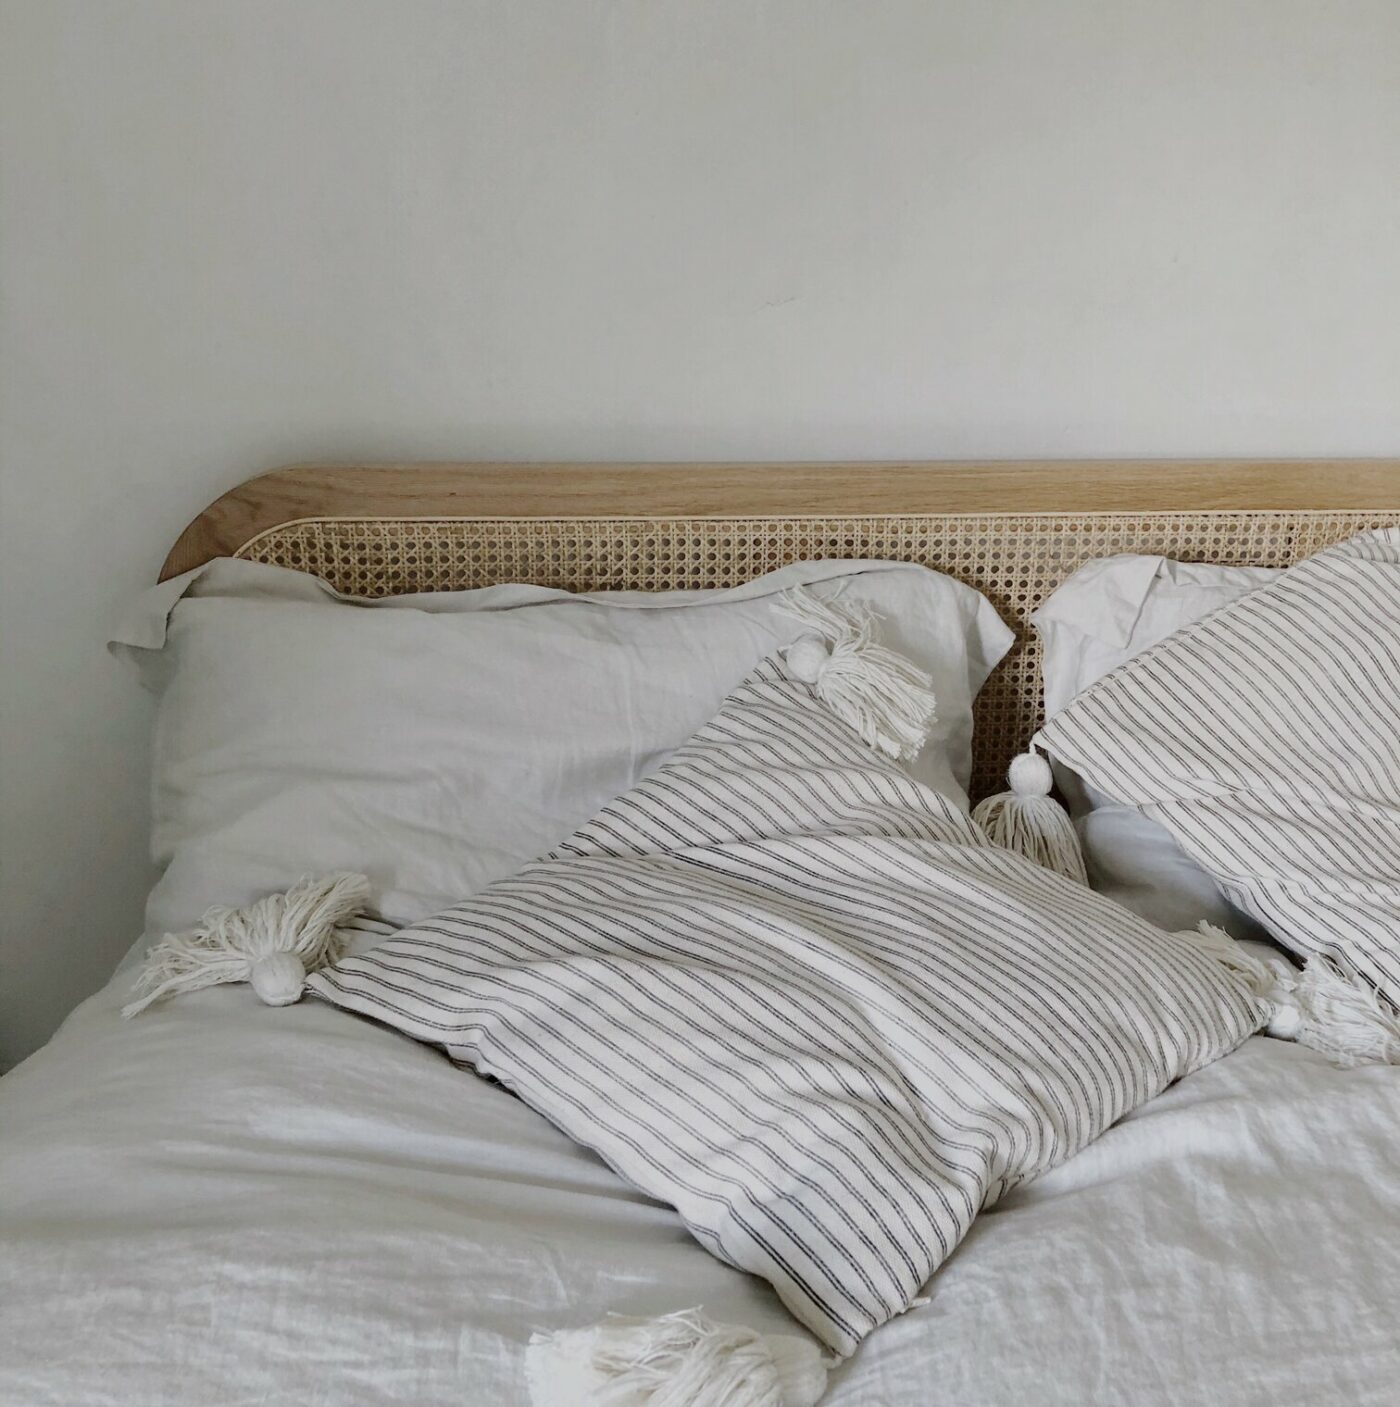 A Guide to Choosing Sustainable Bed Linen